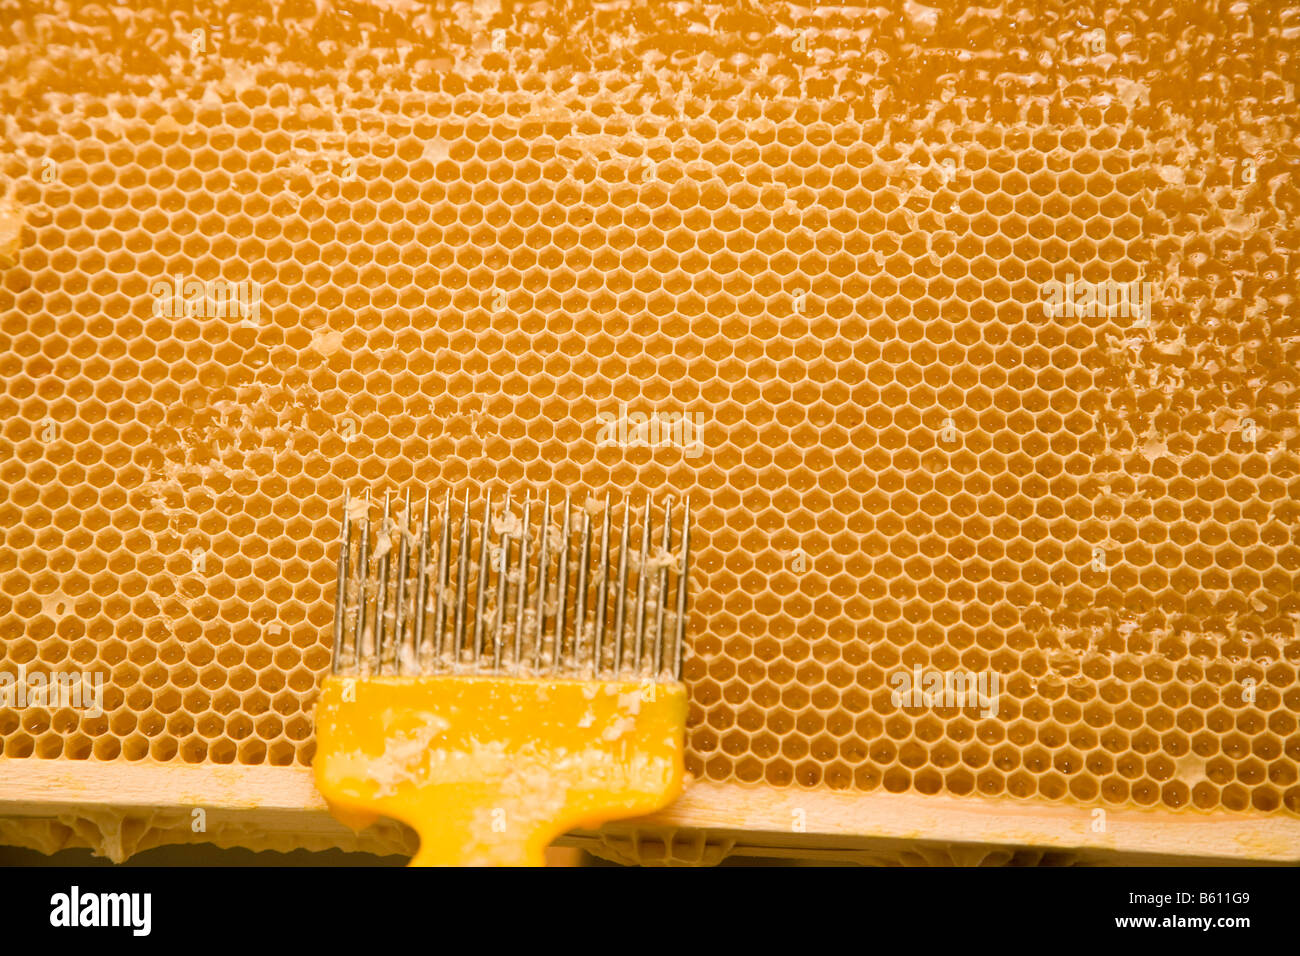 A beekeeper or apiculturist uncapping a honeycomb with an uncapping fork Stock Photo